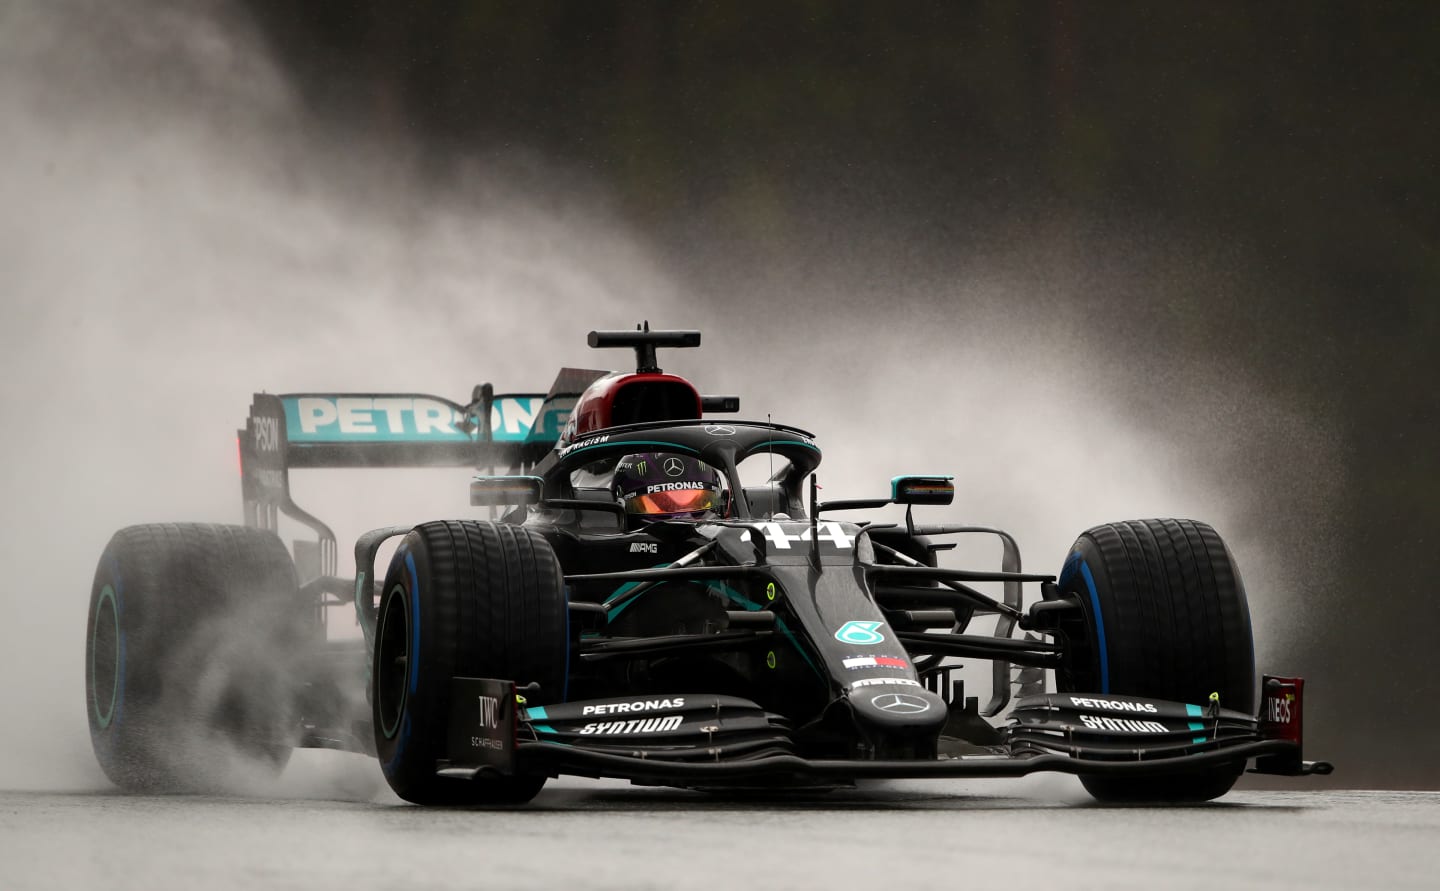 SPIELBERG, AUSTRIA - JULY 11: Lewis Hamilton of Great Britain driving the (44) Mercedes AMG